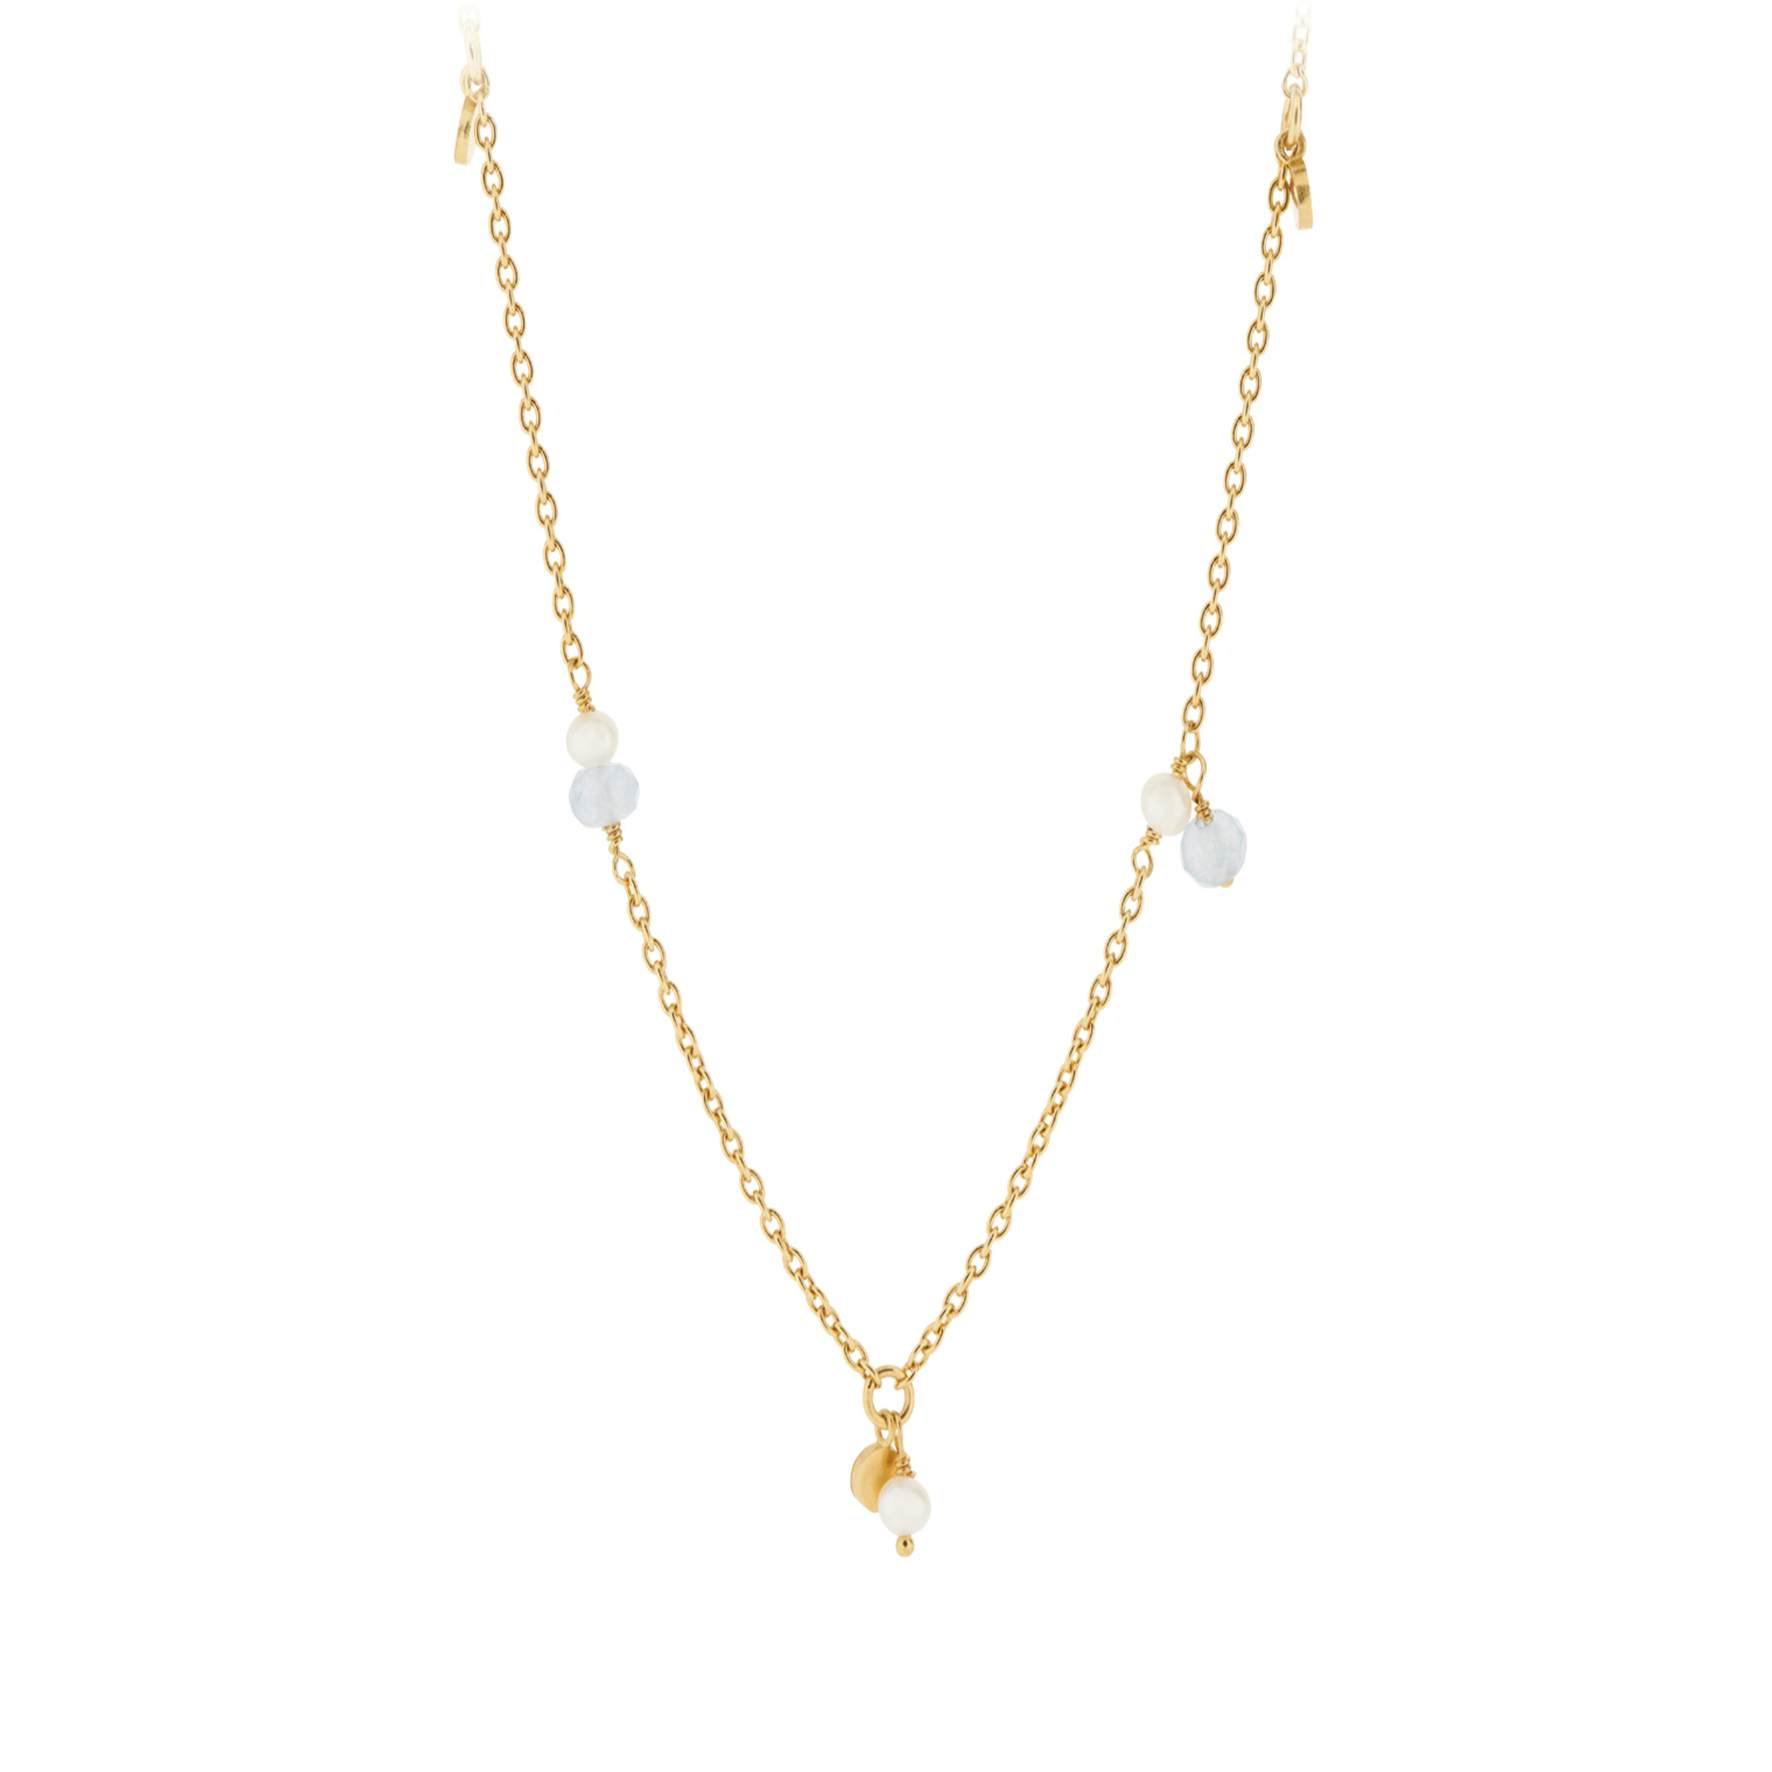 Afterglow Sea Necklace from Pernille Corydon in Goldplated-Silver Sterling 925| Matt,Blank